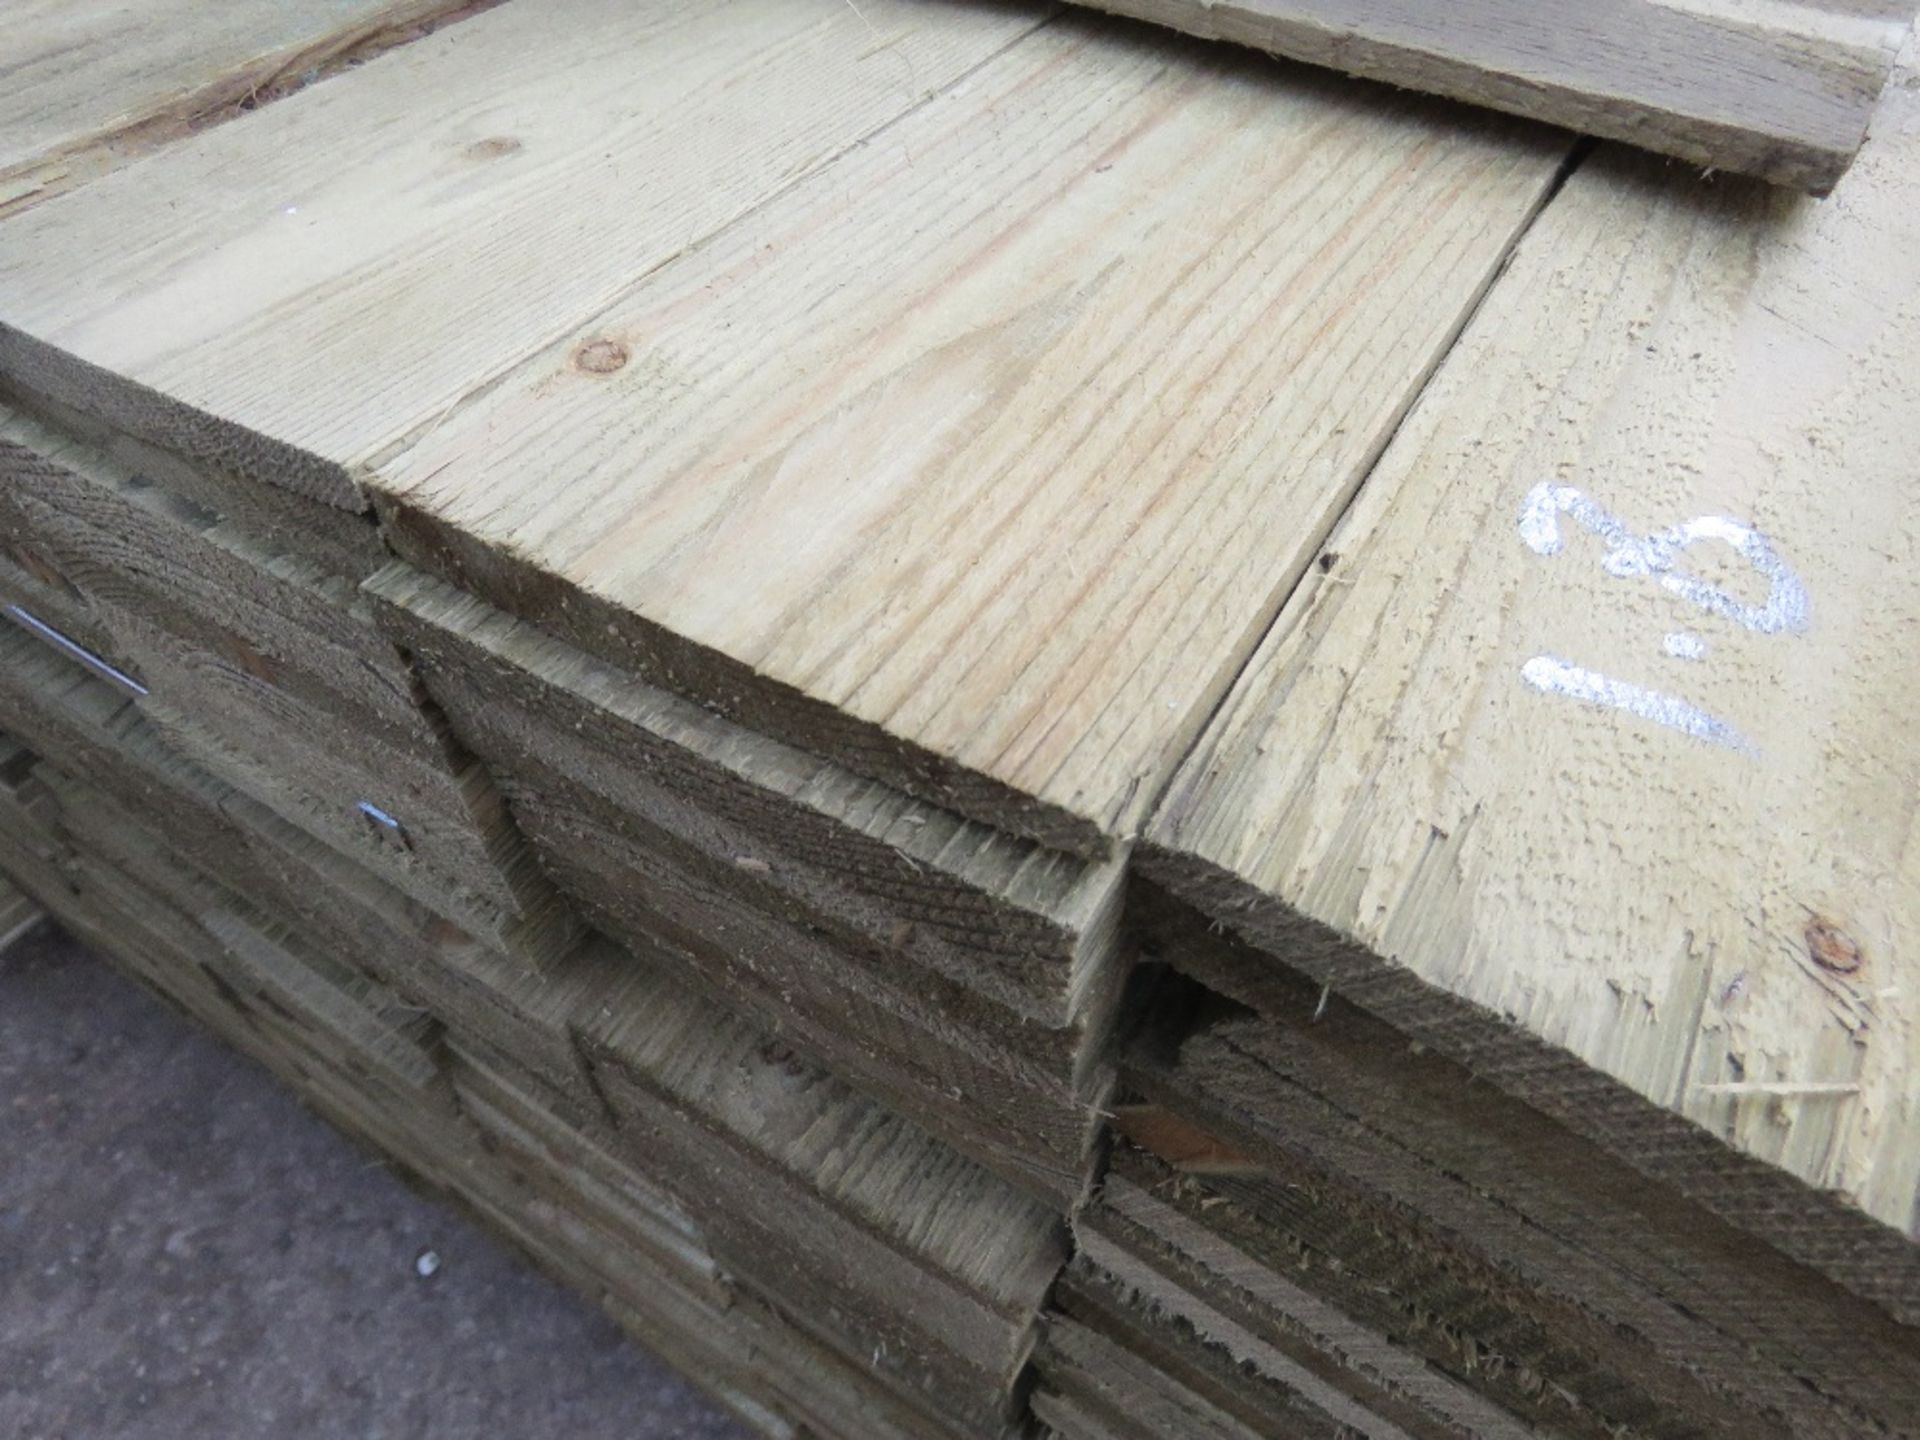 LARGE PACK OF PRESSURE TREATED FEATHER EDGE FENCE CLADDING BOARDS. 1.8M LENGTH X 100MM WIDTH APPROX. - Image 3 of 3